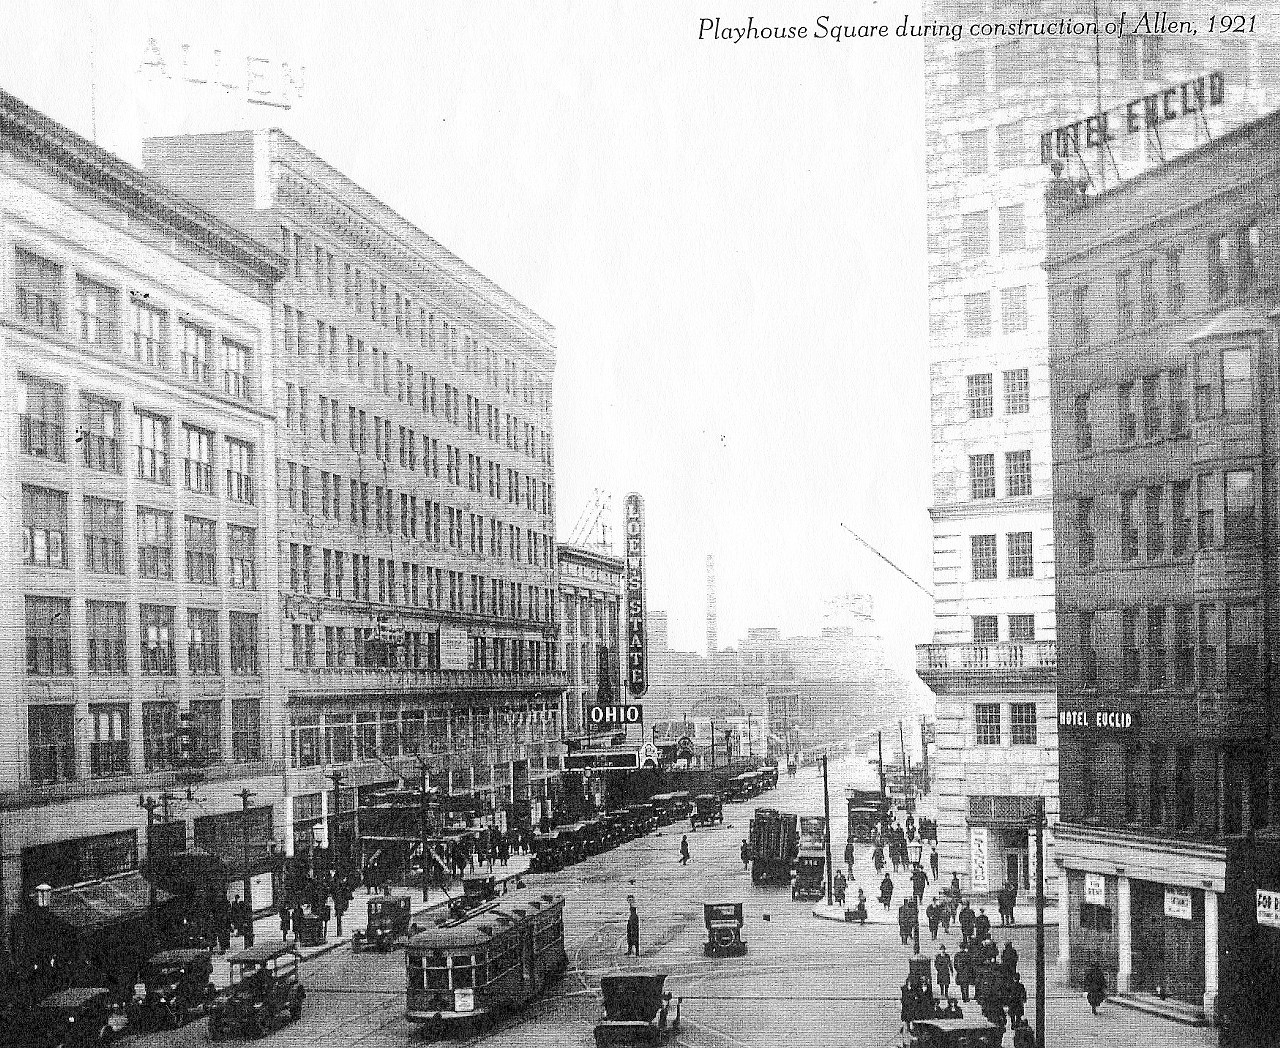 Playhouse Square during construction of the Allen Theatre, 1921